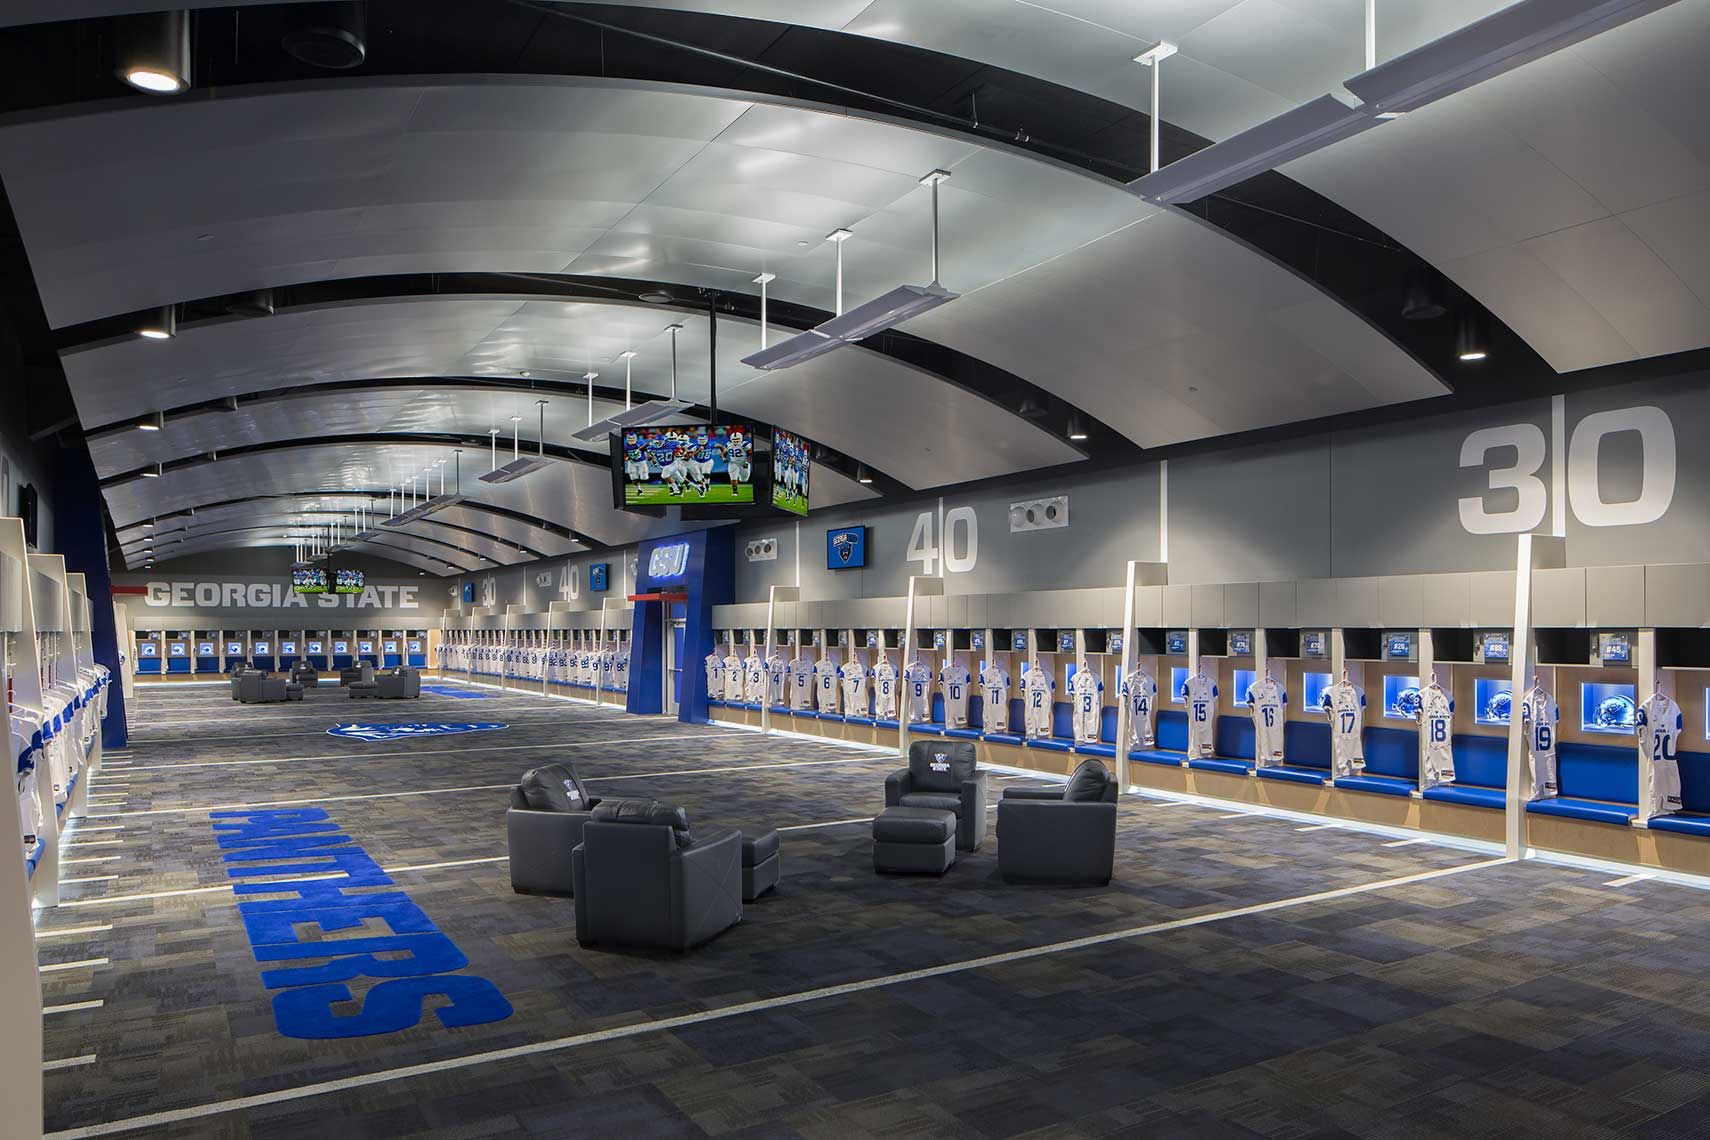 An overall interior view of the Georgia State Stadium Locker Room